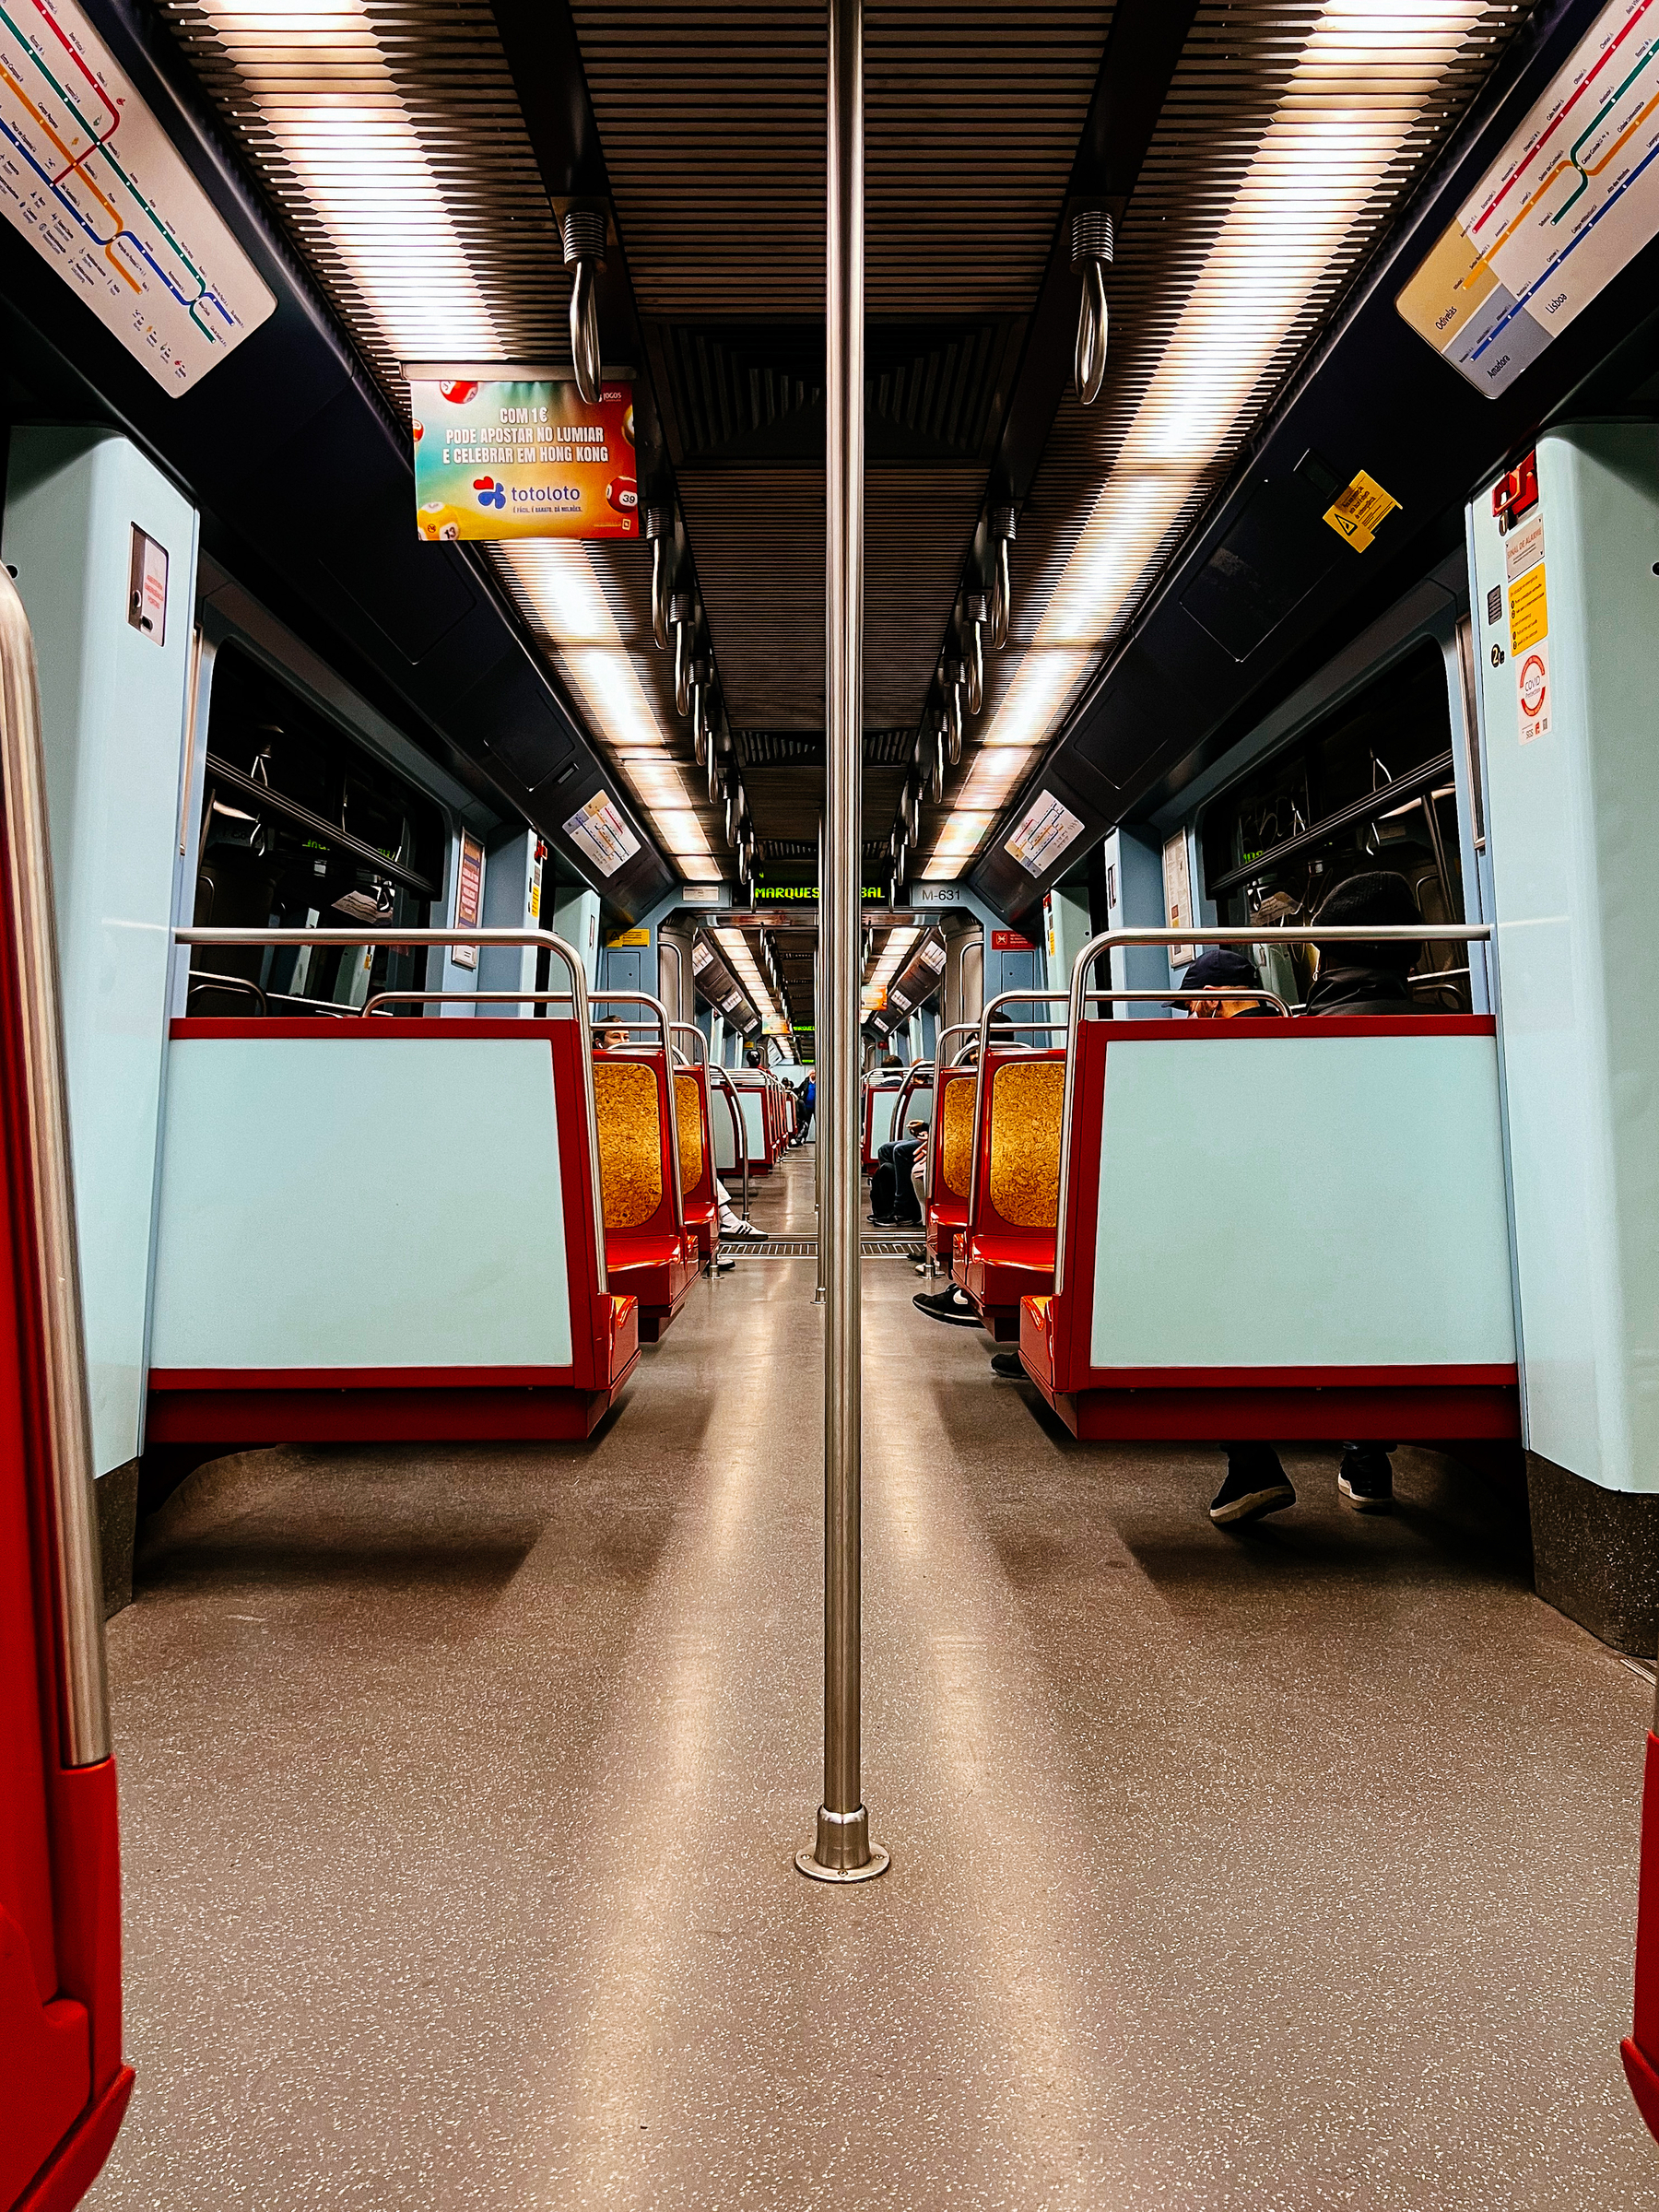 Inside a subway car, the seats pale blue and red. Mostly empty. 